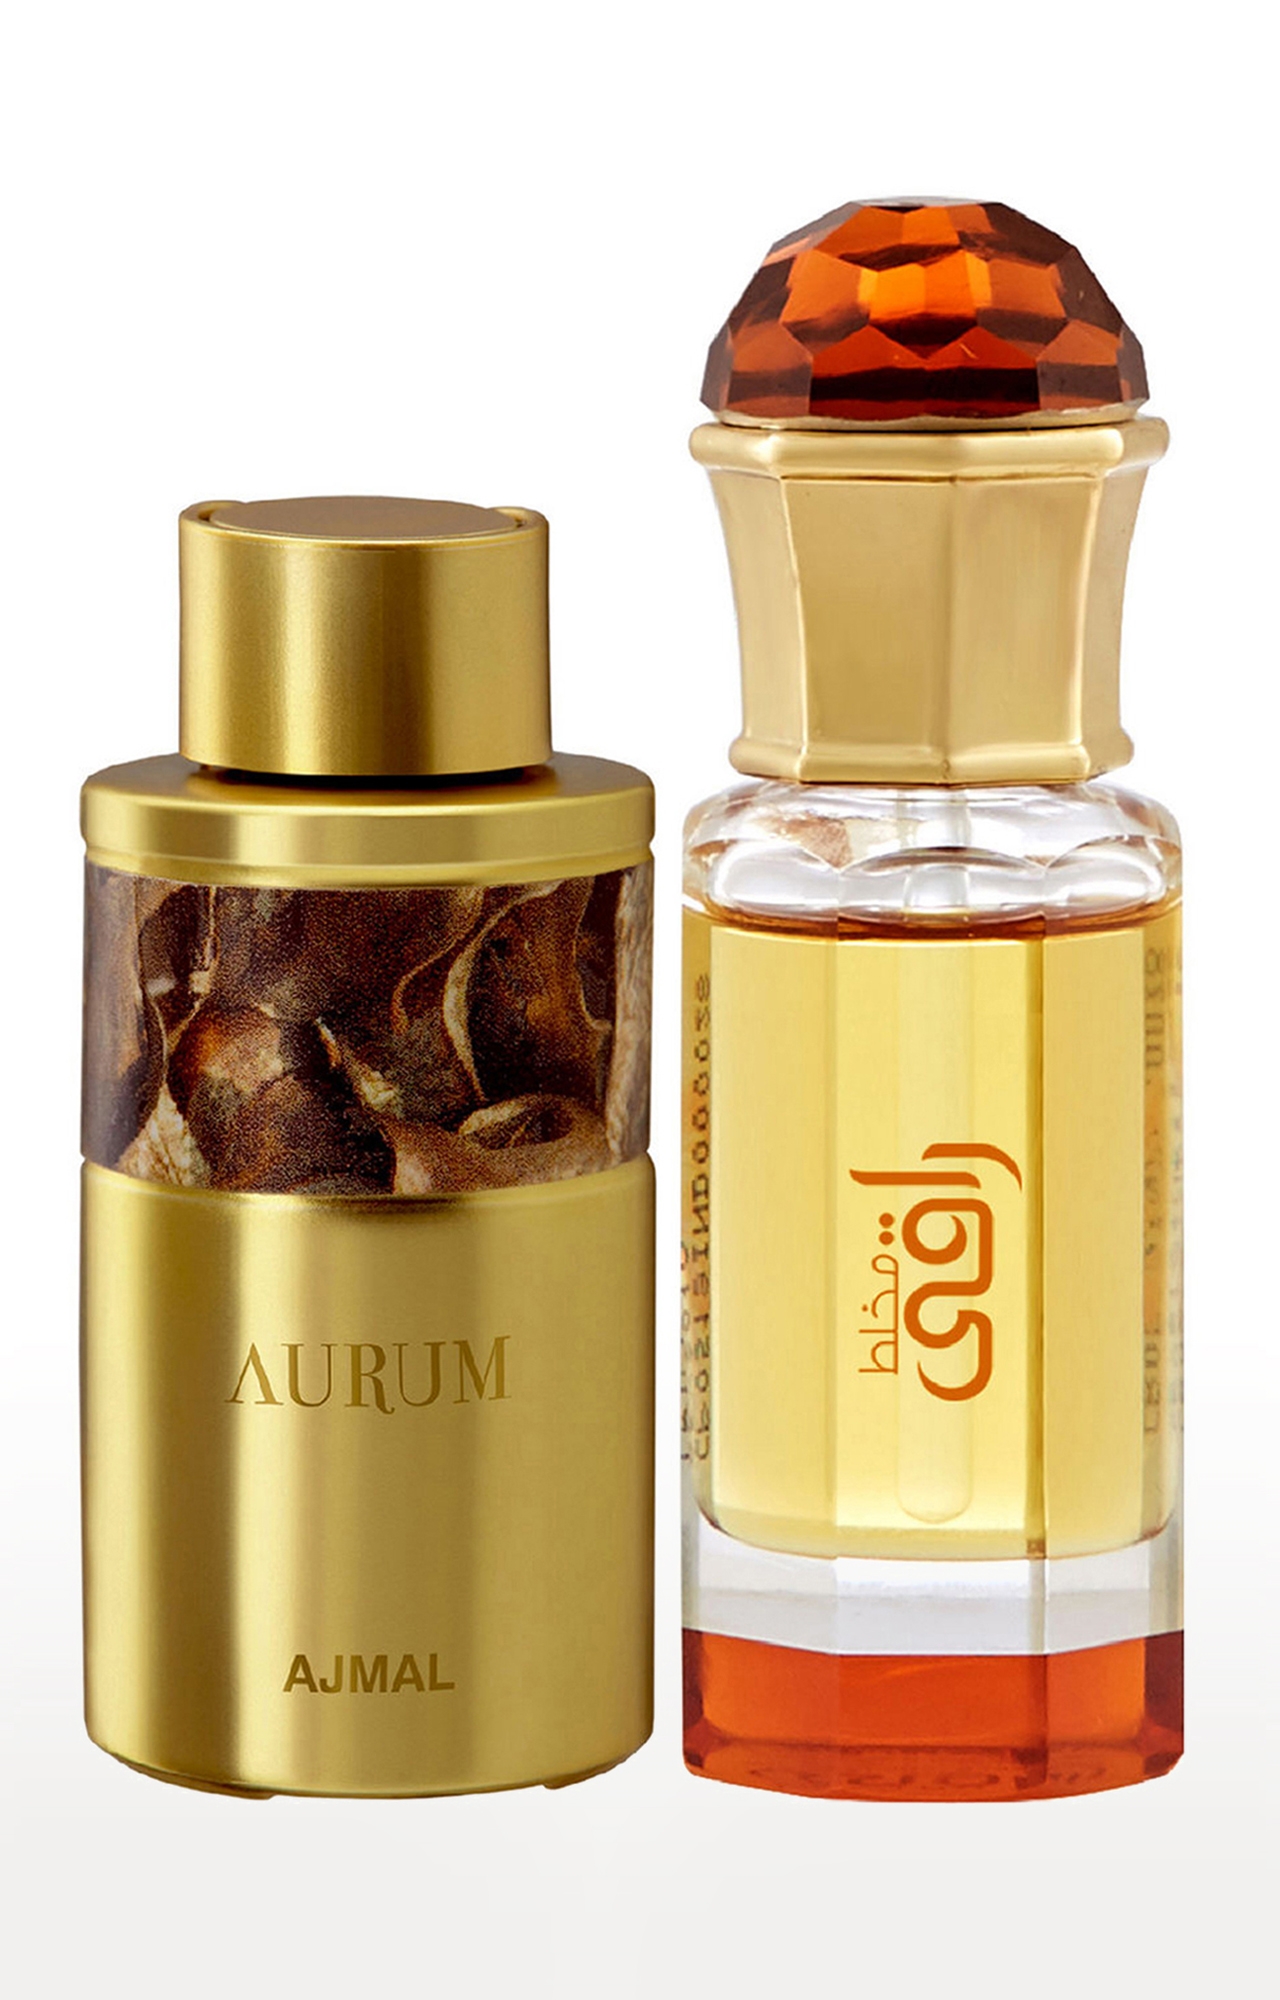 Ajmal Aurum Concentrated Perfume Oil Alcohol-free Attar 10ml for Women and Mukhallat Raaqi Concentrated Perfume Oil Alcohol-free Attar 10ml for Unisex